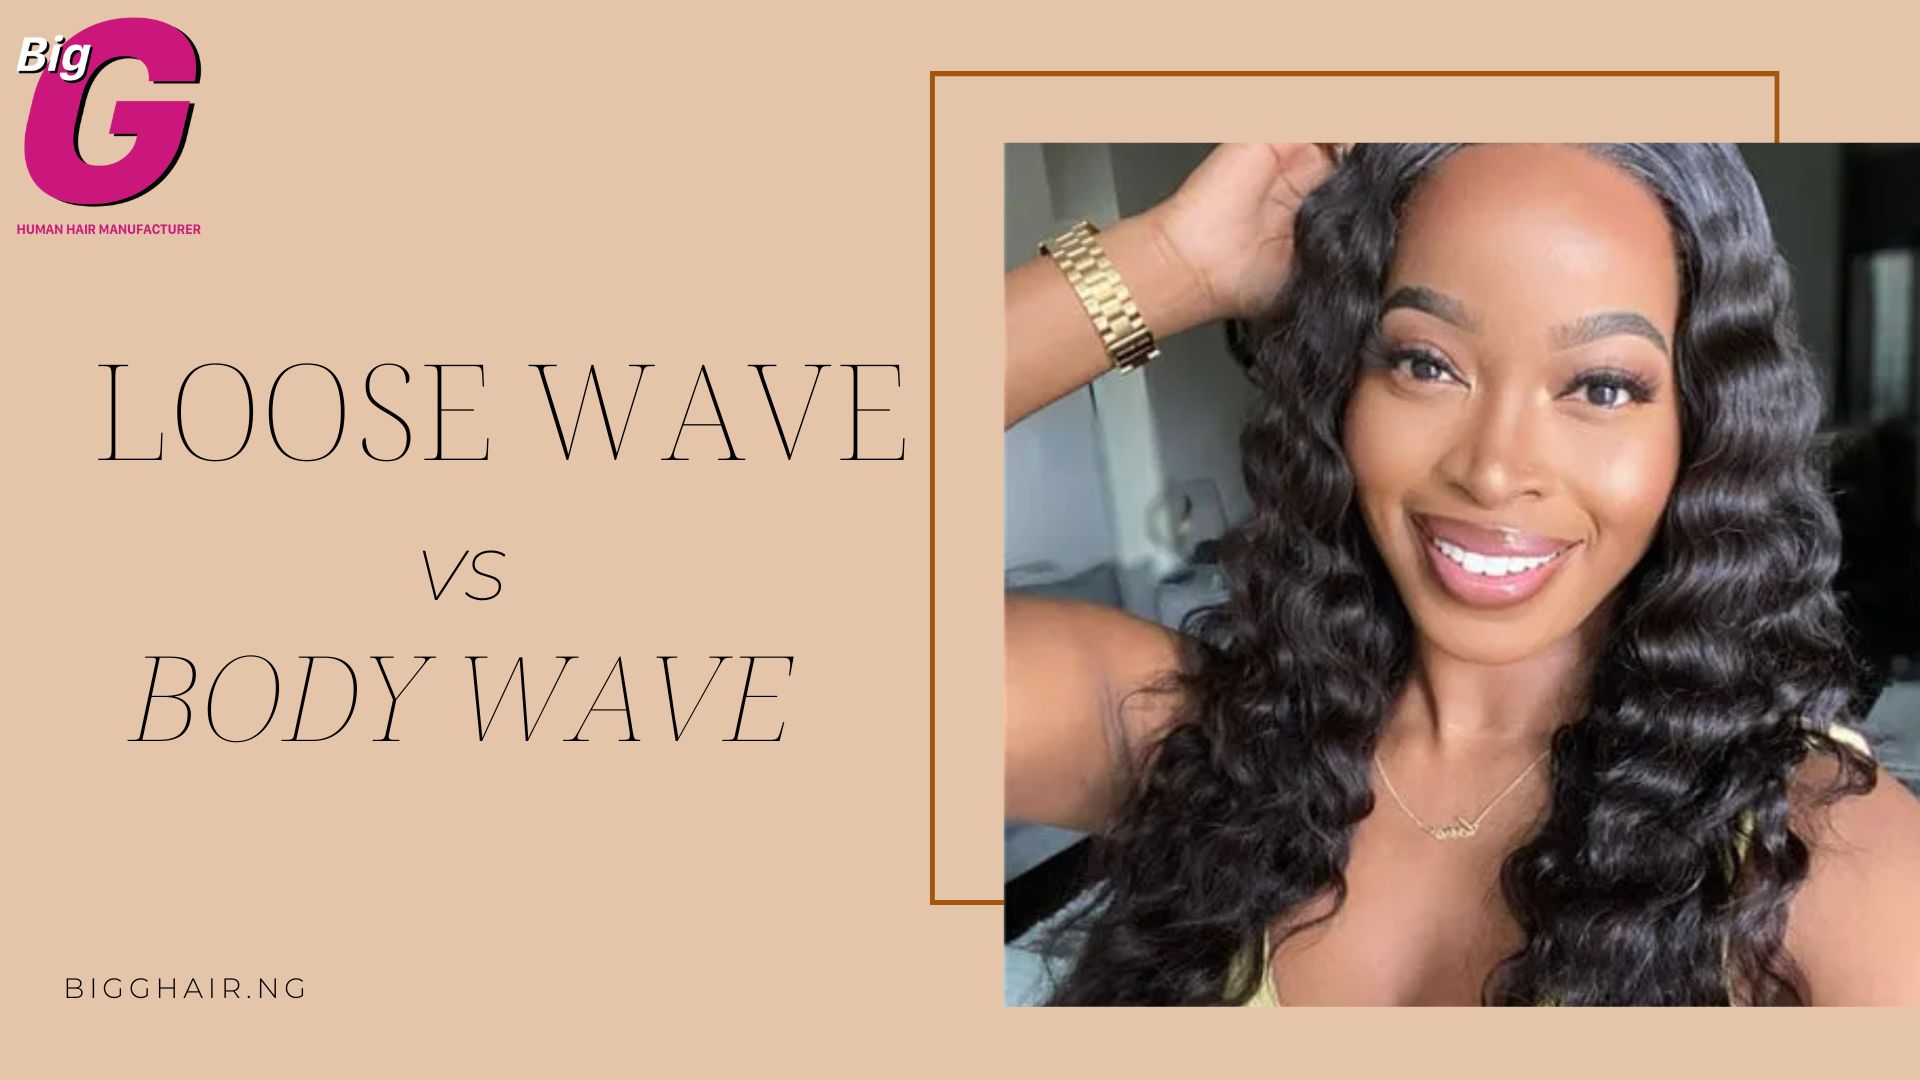 Loose wave vs body wave – What is the difference?